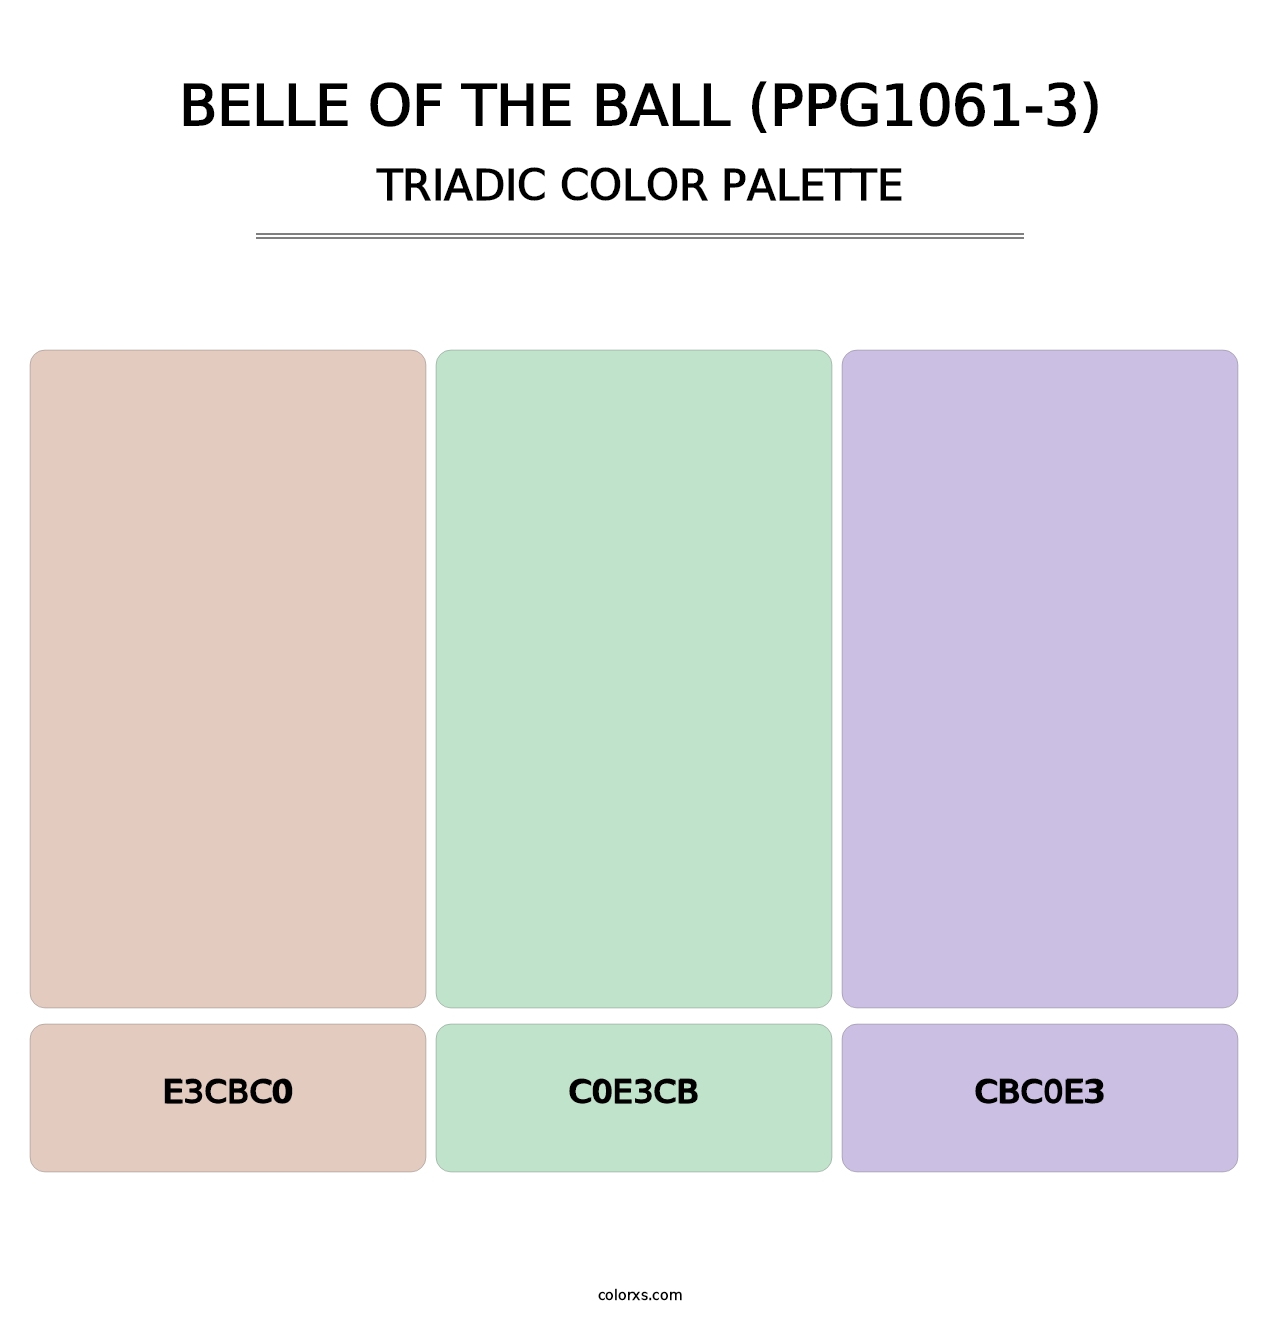 Belle Of The Ball (PPG1061-3) - Triadic Color Palette